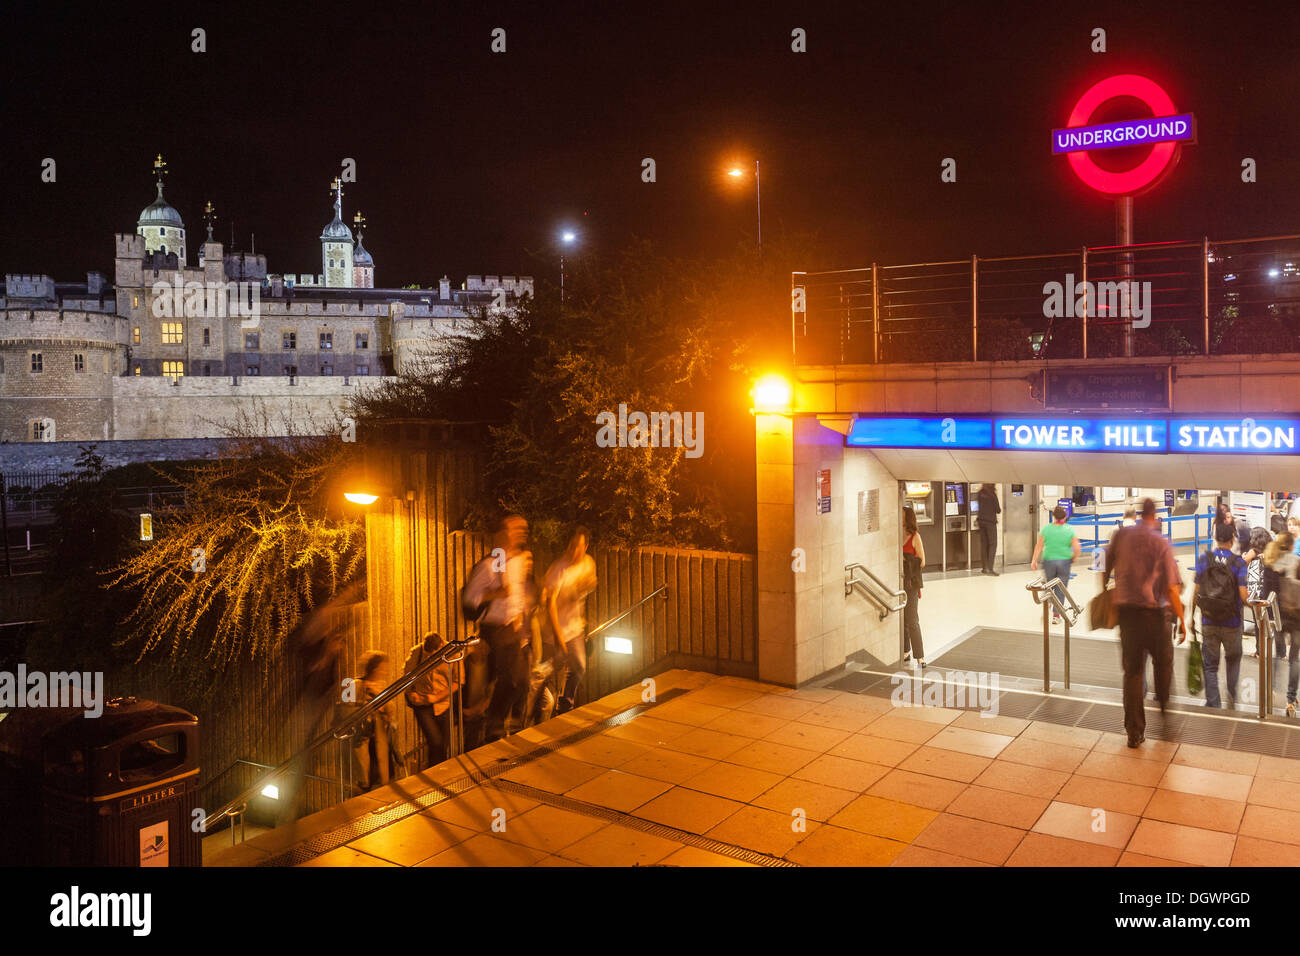 Tower Hill Station, an undergrouind railway station, Tower of London at night, London, England, United Kingdom, Europe Stock Photo